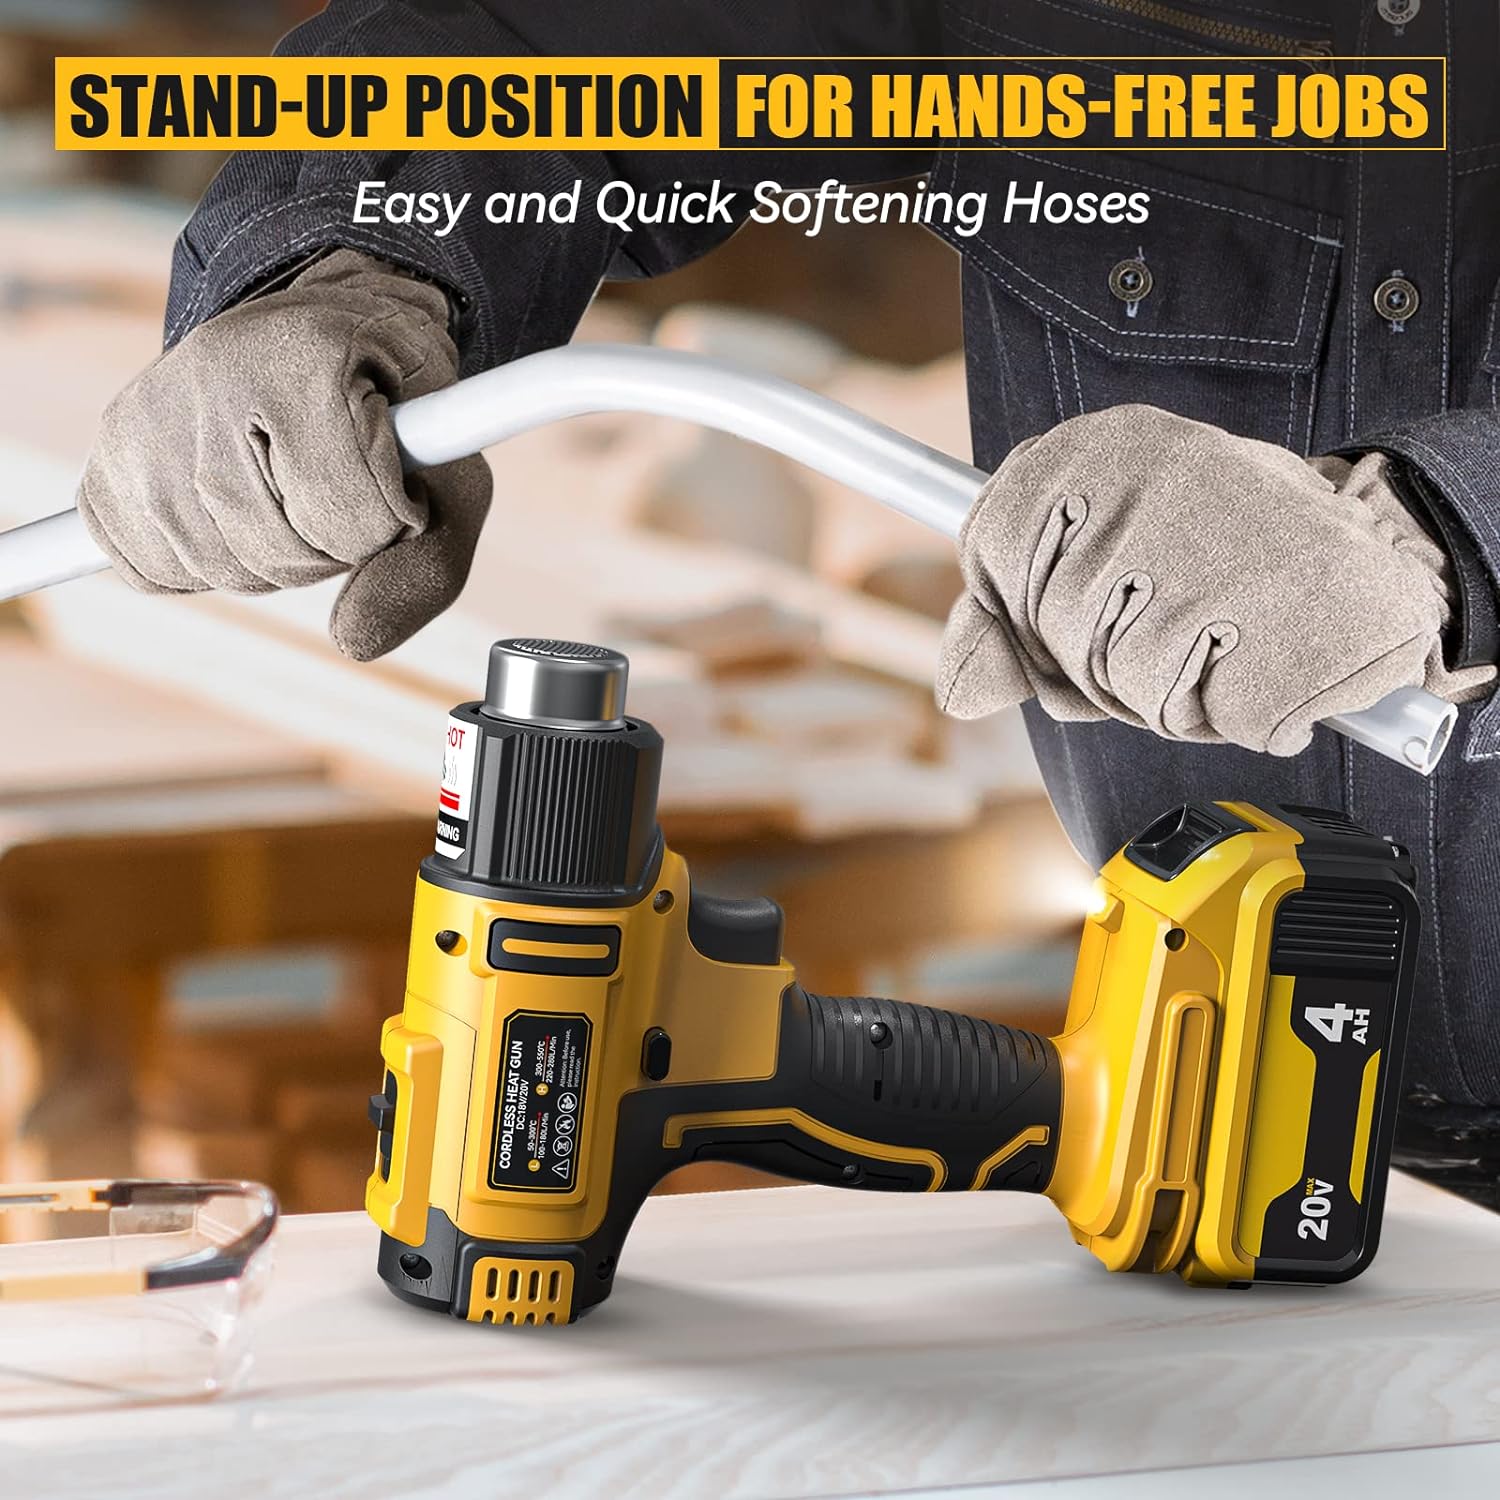 Cordless Heat Gun for DeWalt 20V Battery 122A to 1022A Variable Temperature Fasting Heavy Duty Hot Air Heat with 5pcs Nozzles at MechanicSurplus.com